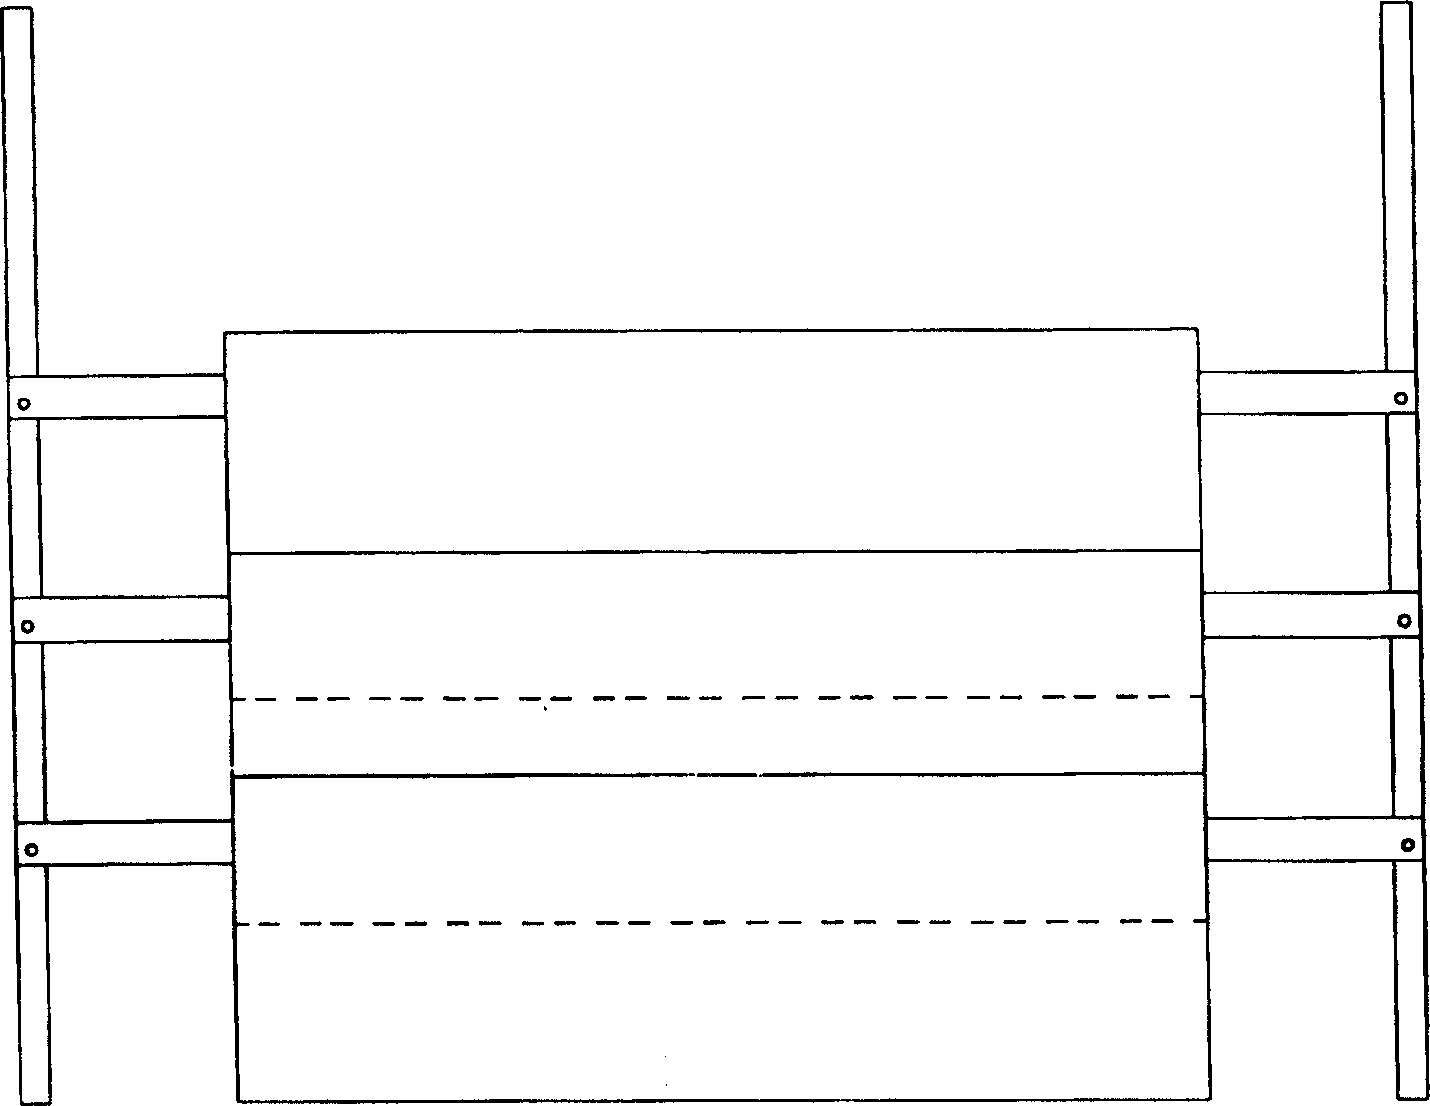 Multipicture covering method and mobile hanging advertisement machine for implementing said method